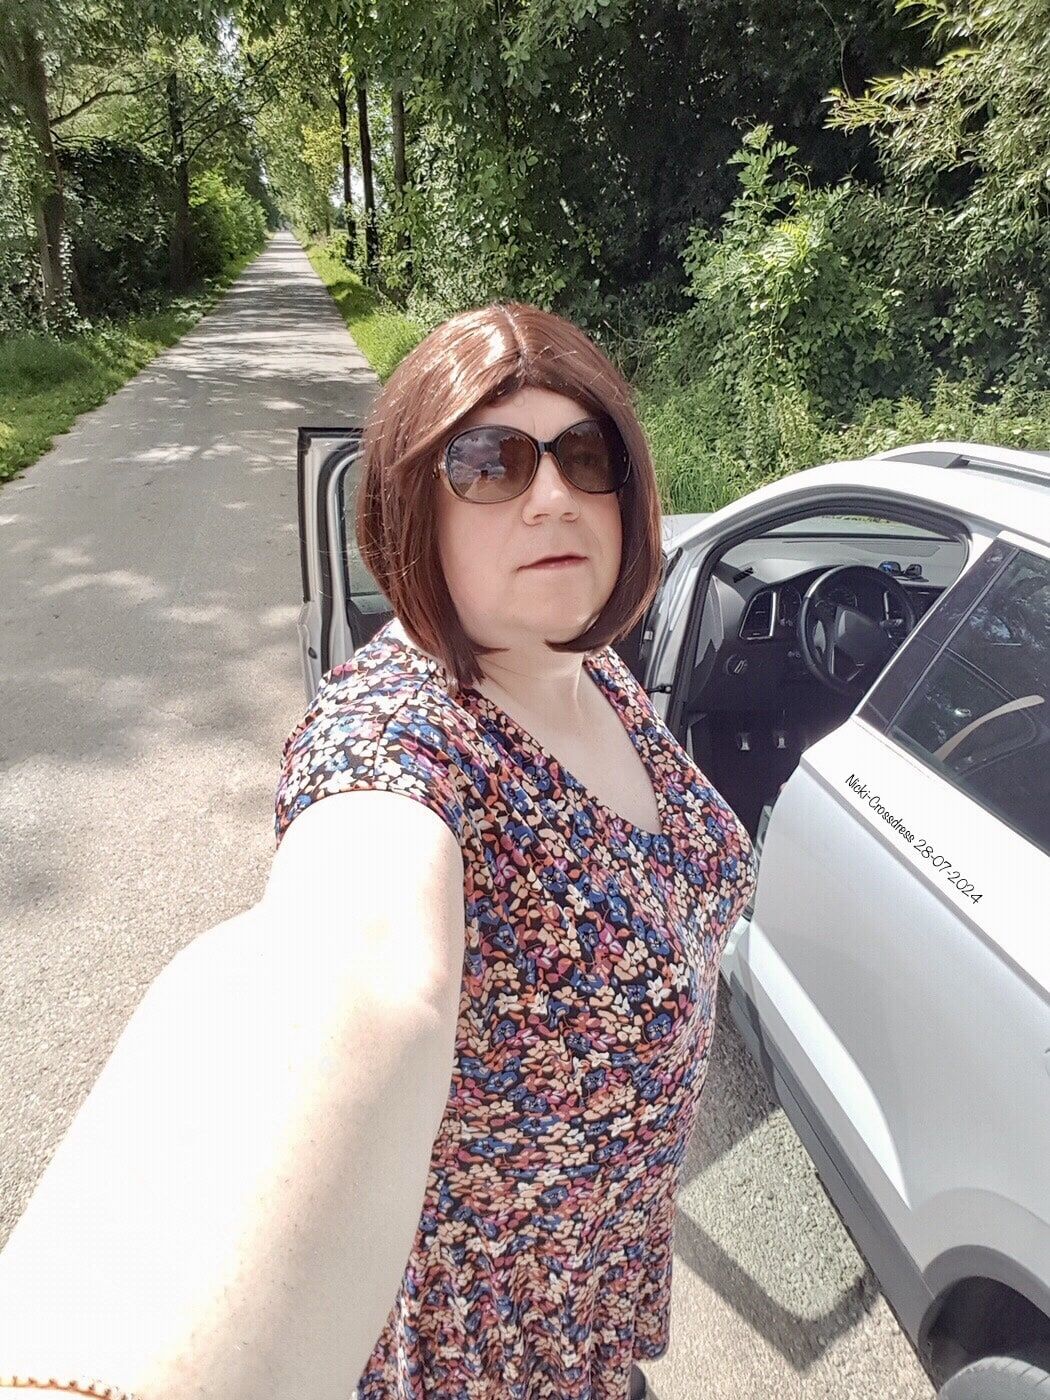 Nicki-Crossdress Outdoor - A nice day out in summer 